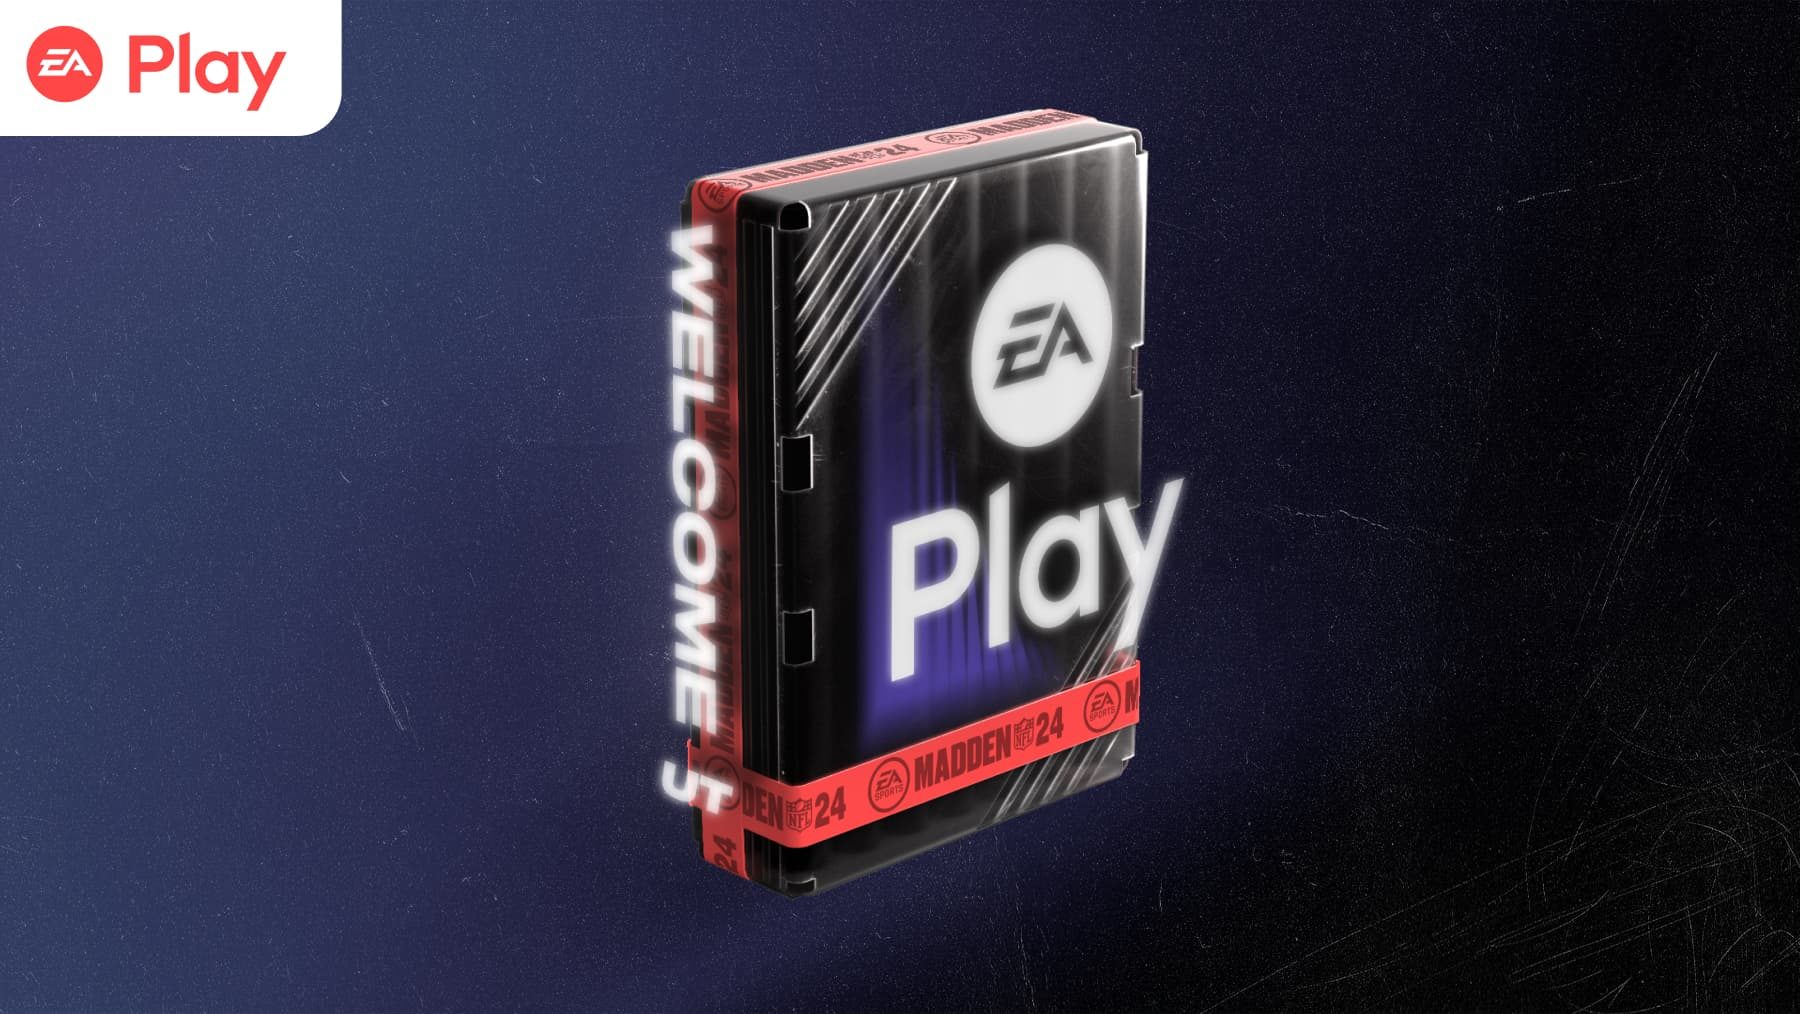 EA Play Member Only January Rewards Available Madden, NHL, FIFA